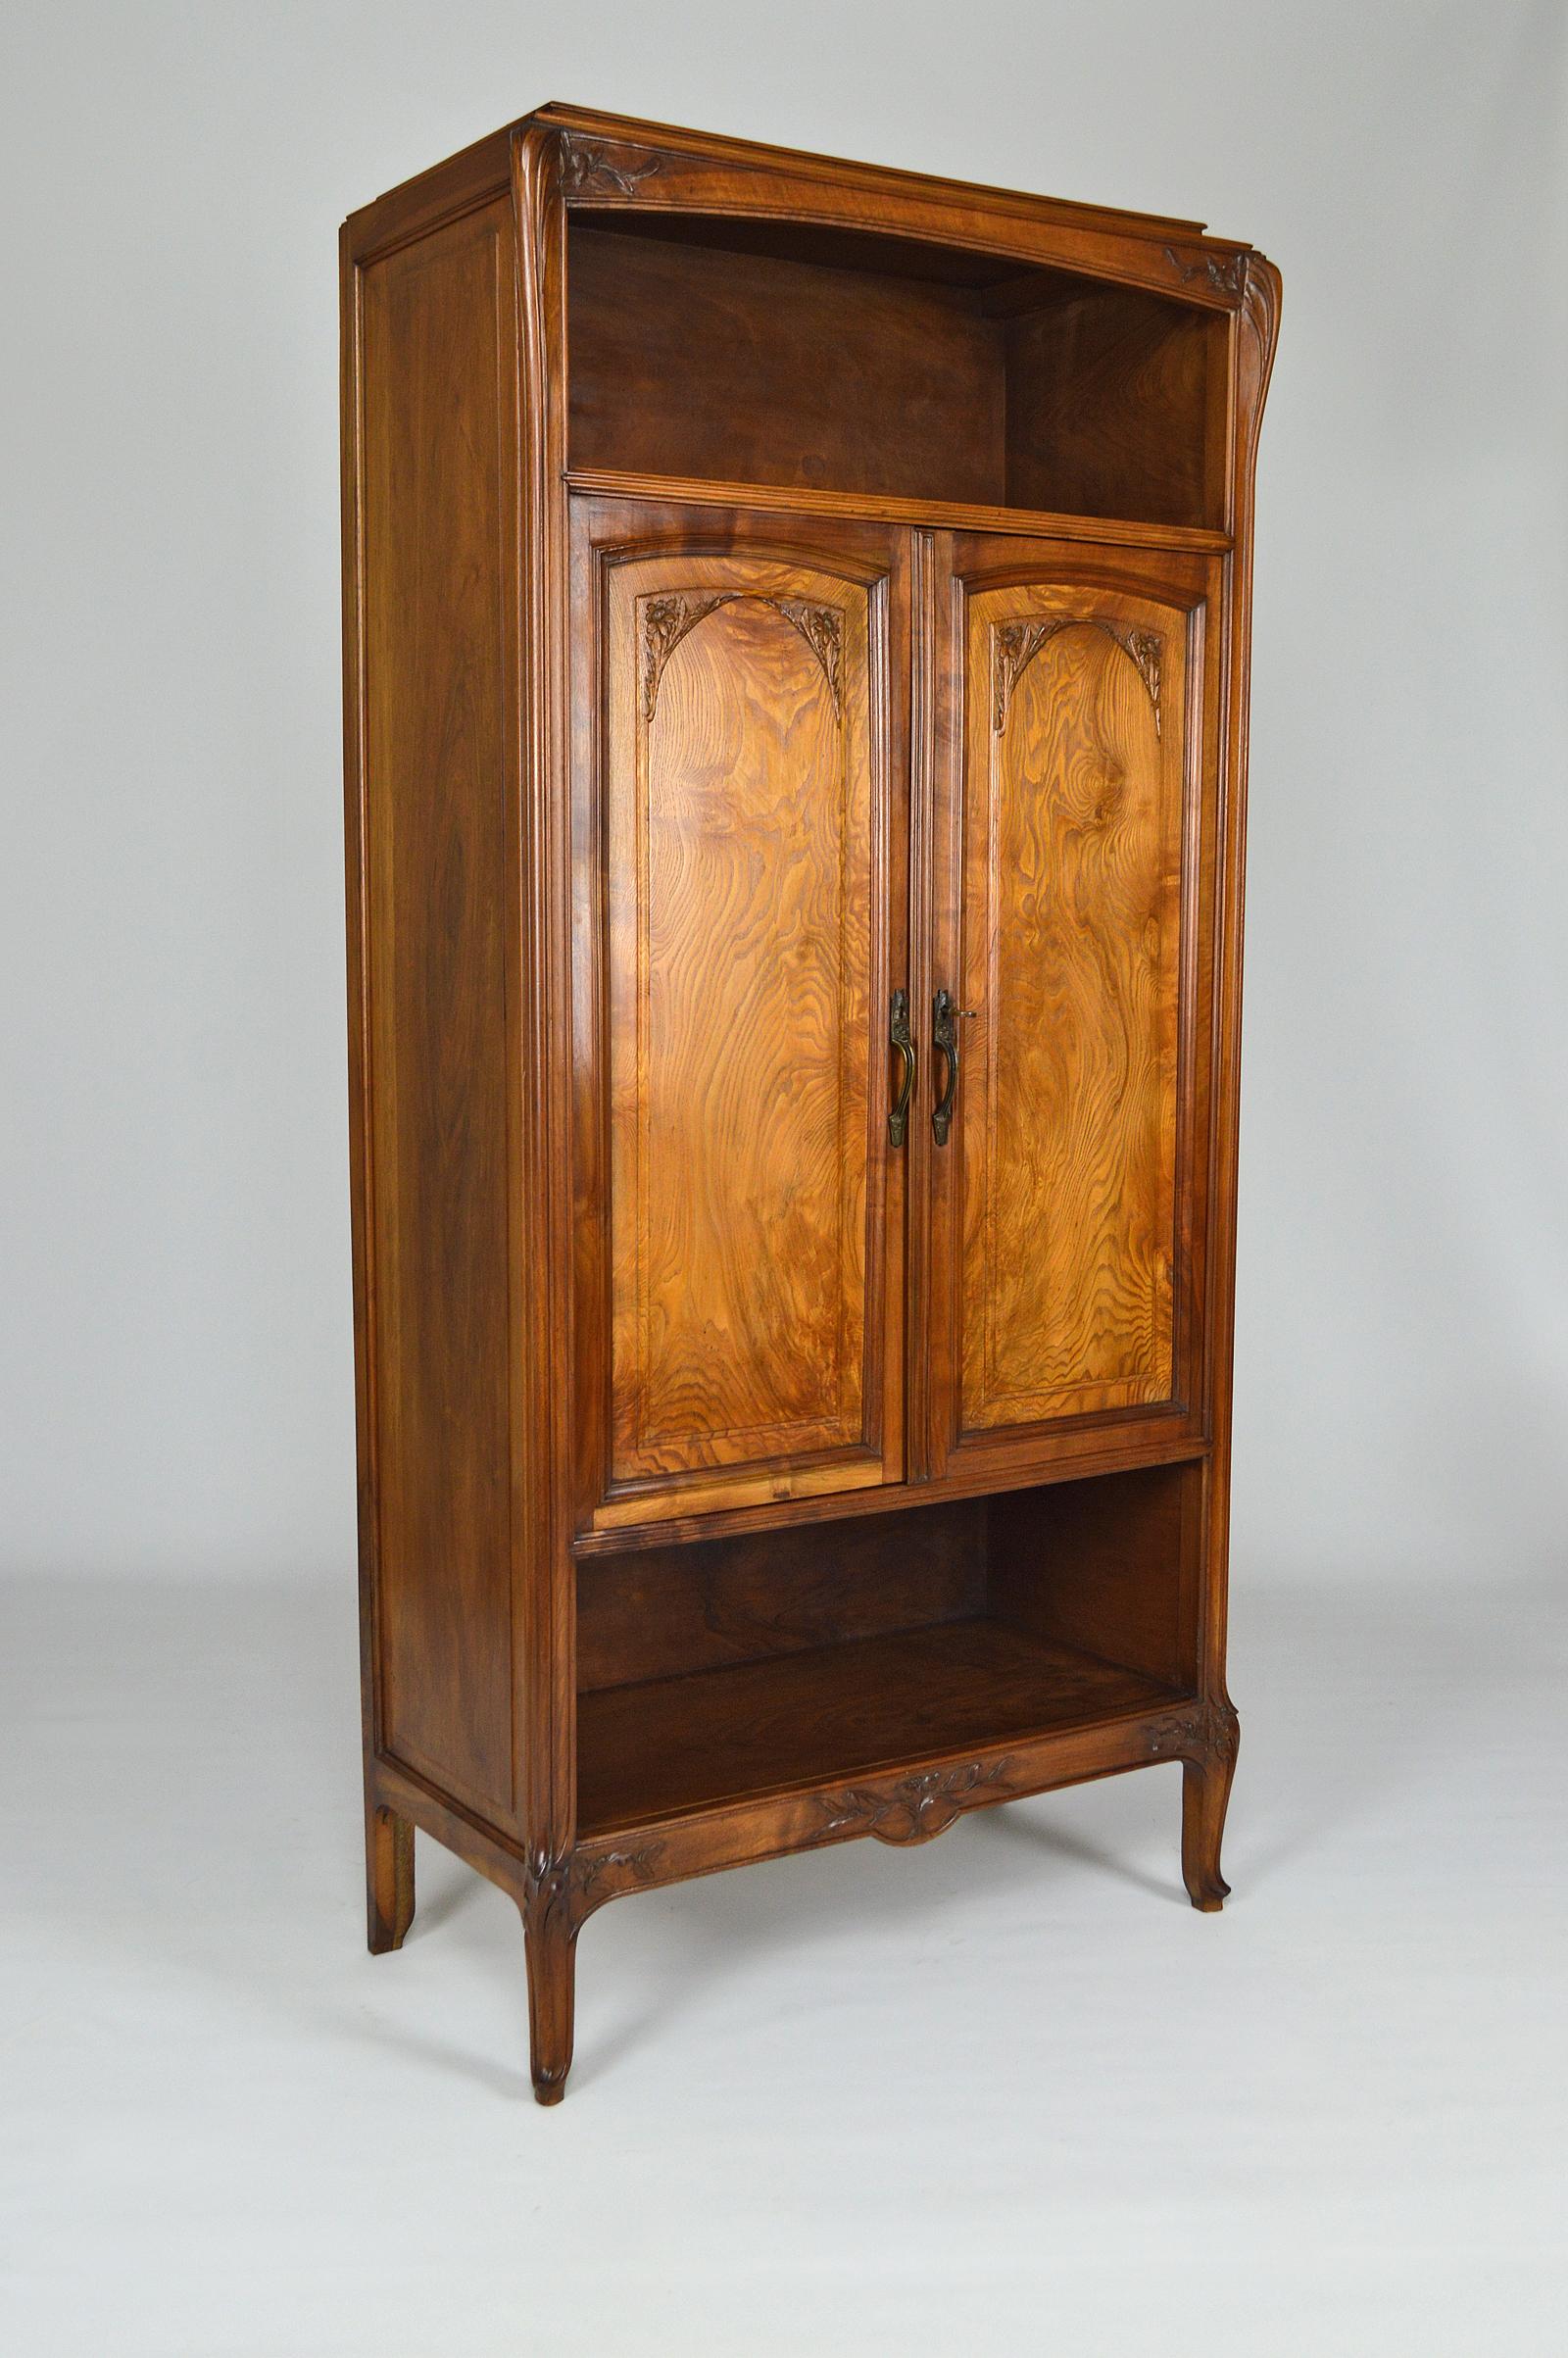 French Cabinet in Carved Wood on a Floral Theme, Art Nouveau, France, circa 1905